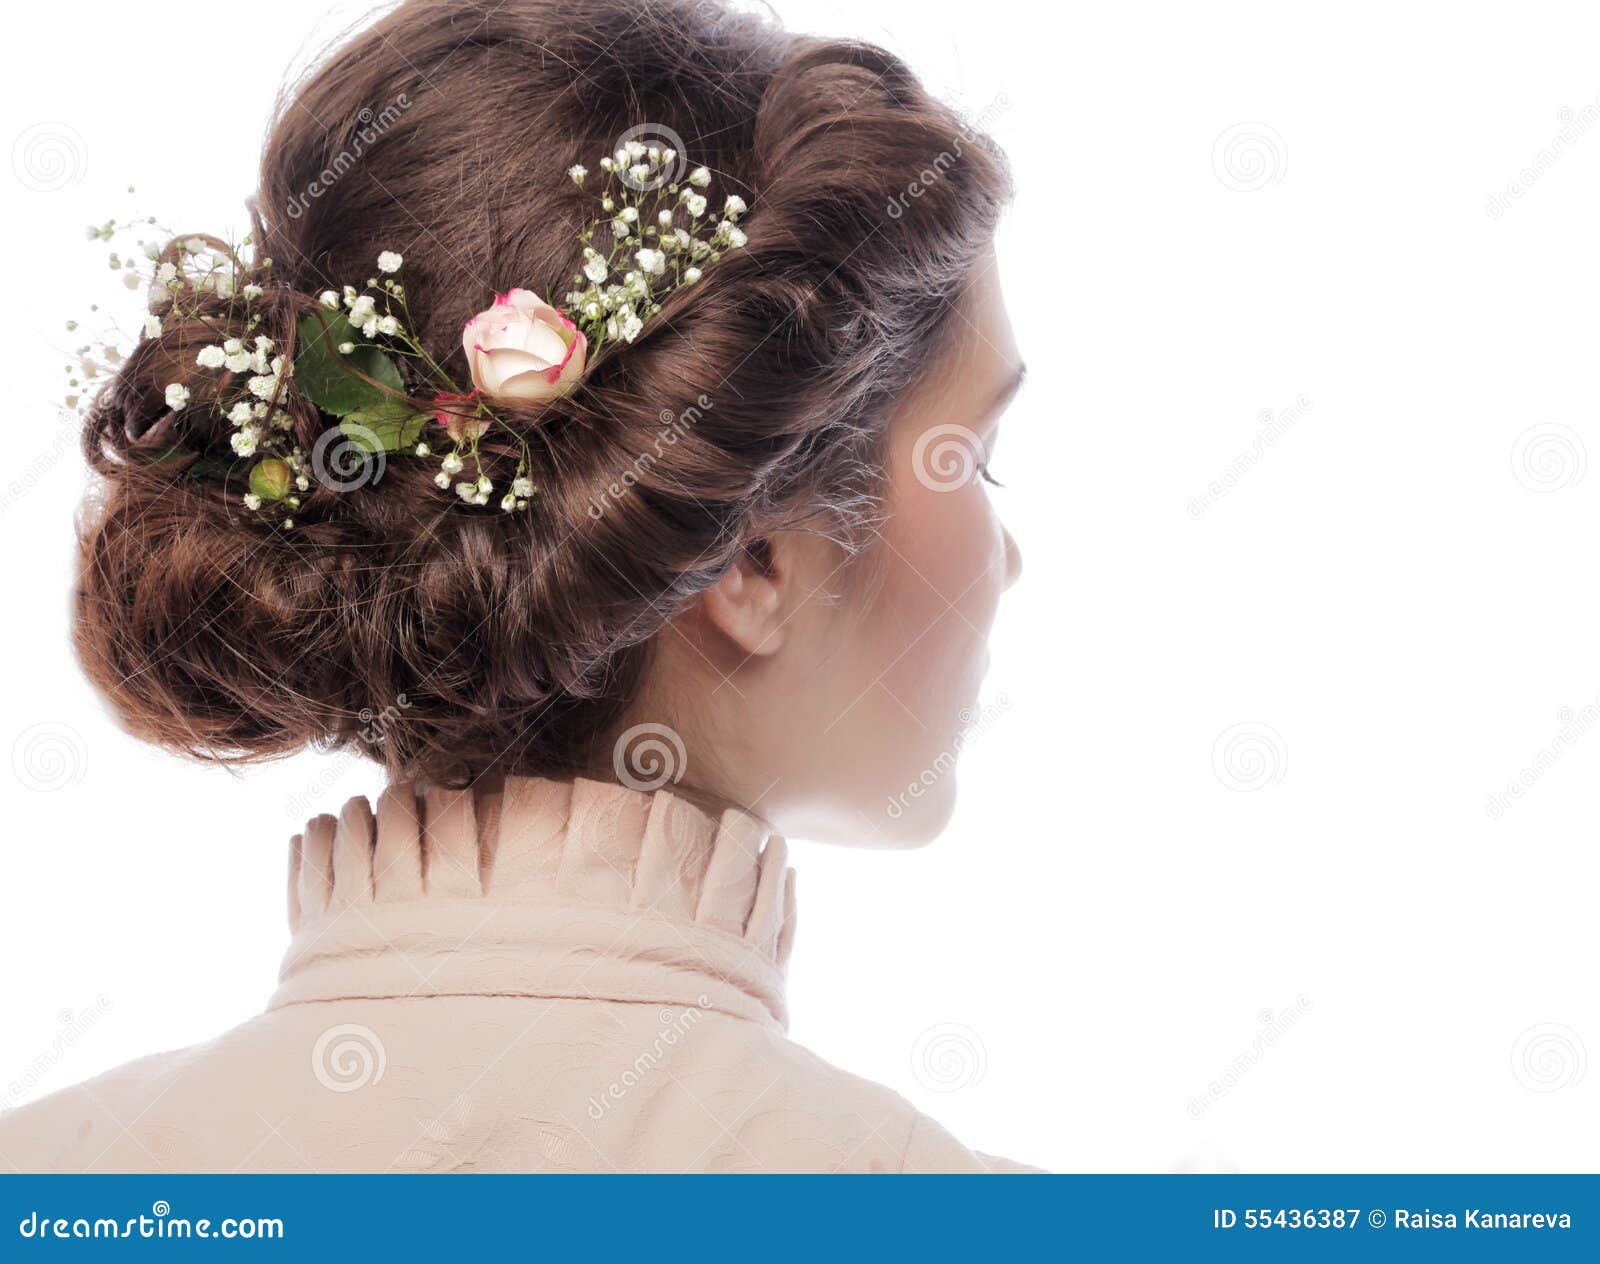 Back View of Beautiful Haircut with Small Flowers Stock Image - Image of  brunette, rose: 55436387